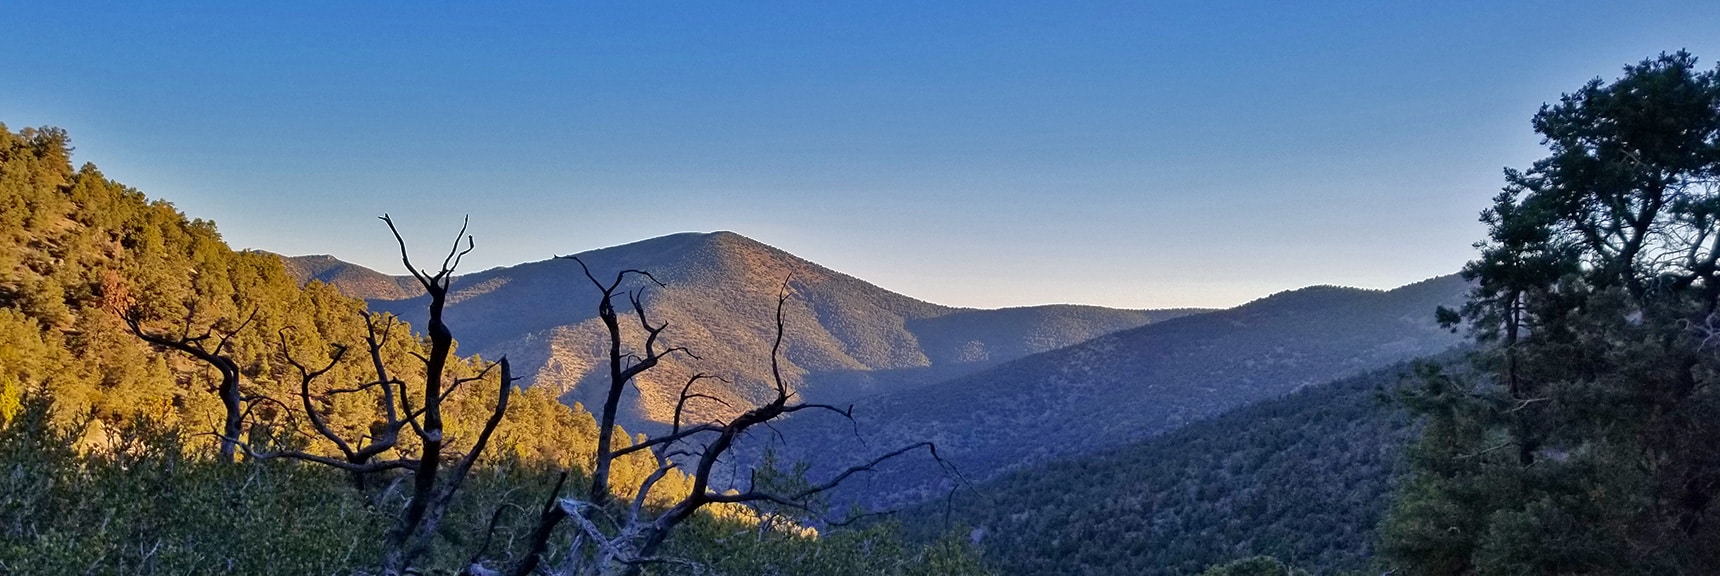 View of Wildrose Peak from Mahogany Flat Ascent Road | Telescope Peak Summit from Wildrose Charcoal Kilns Parking Area, Panamint Mountains, Death Valley National Park, California